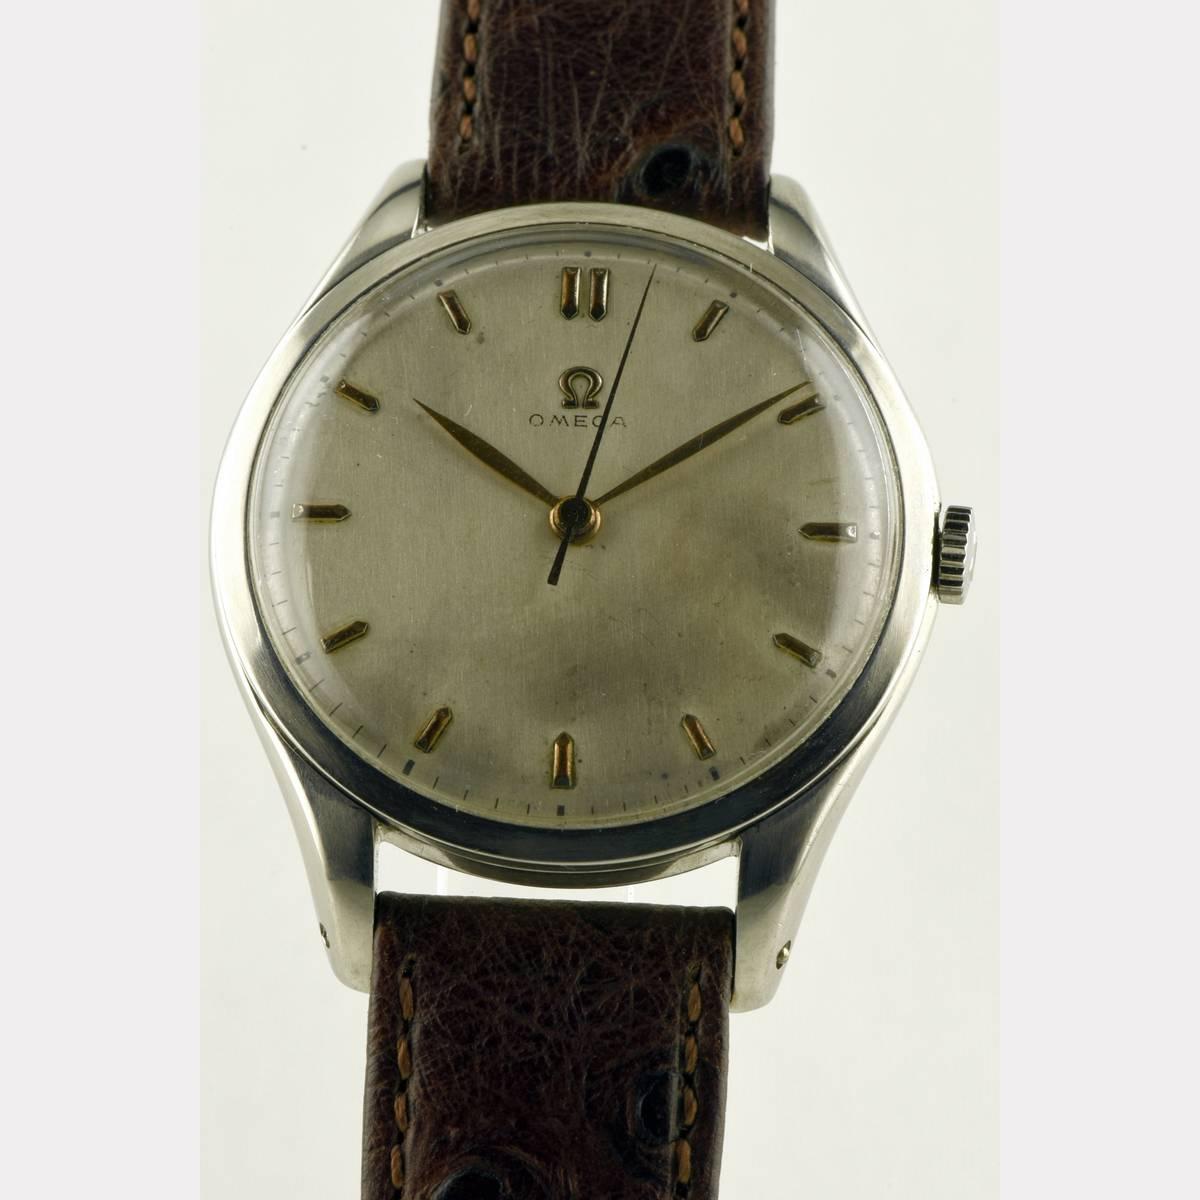 Shortly after the Second World War, OMEGA produced this unusually large, elegant wristwatch. For this time absolutely unusual was the housing diameter of 38 mm. Made in stainless steel, the case has survived quite well, but the movement is almost